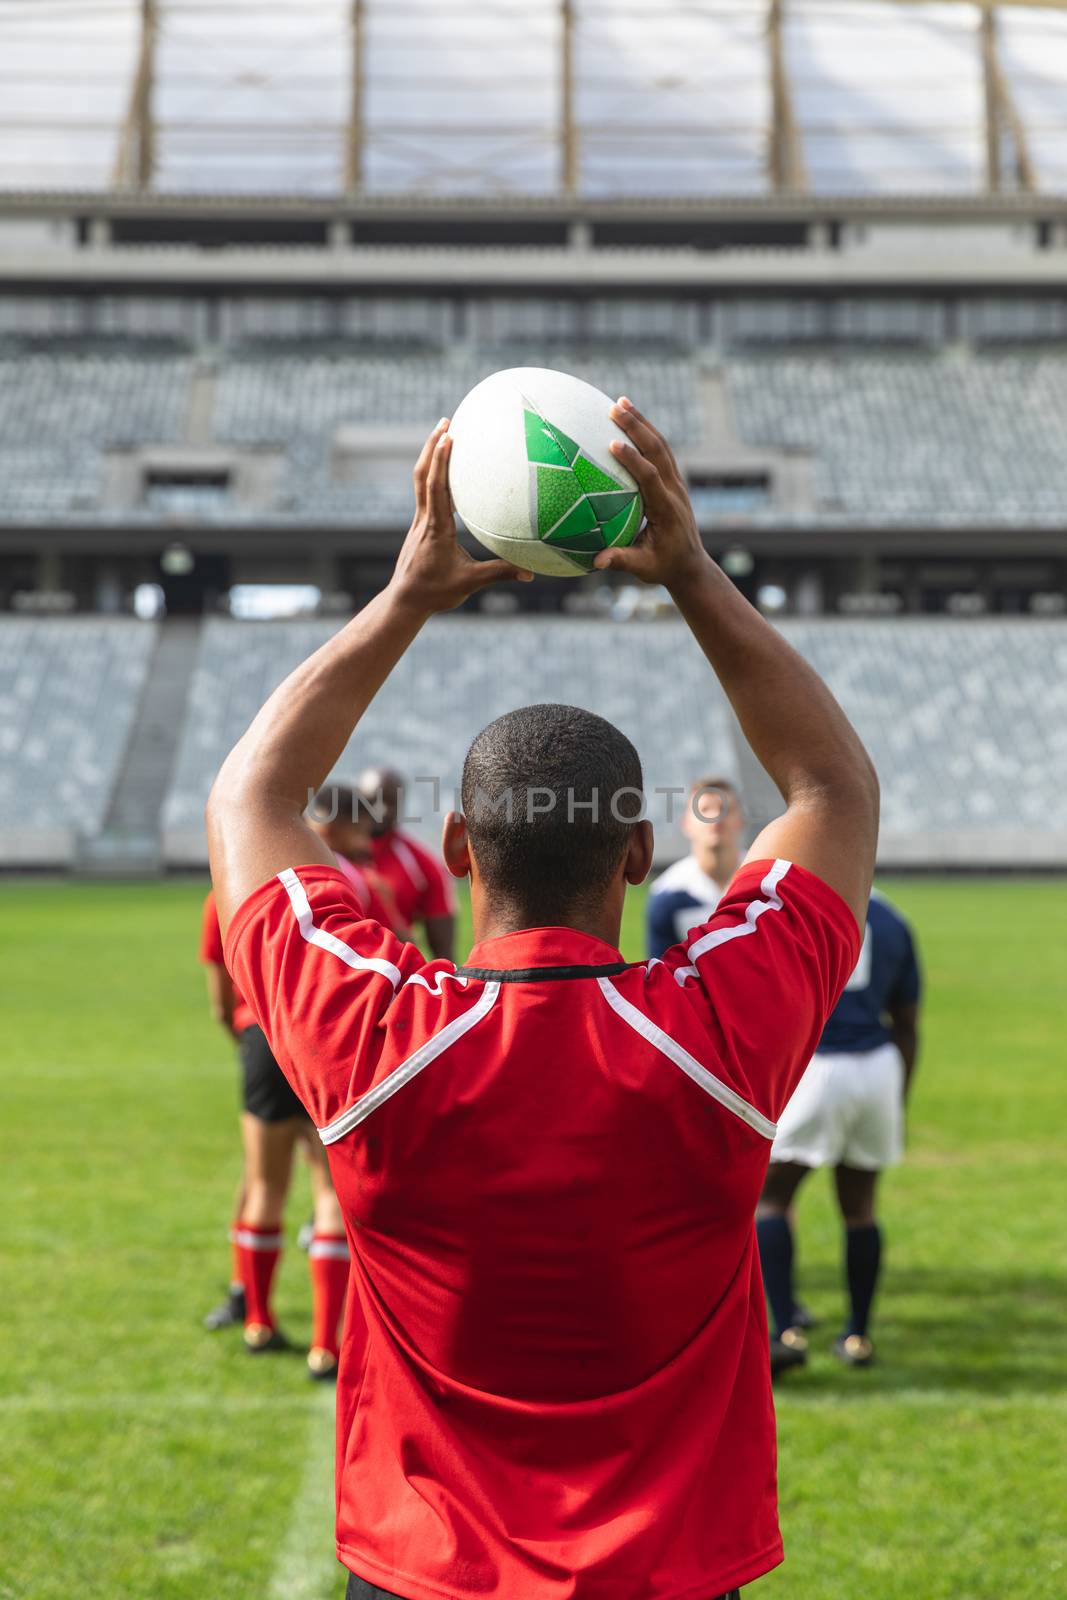 Male rugby player throwing rugby ball in stadium by Wavebreakmedia